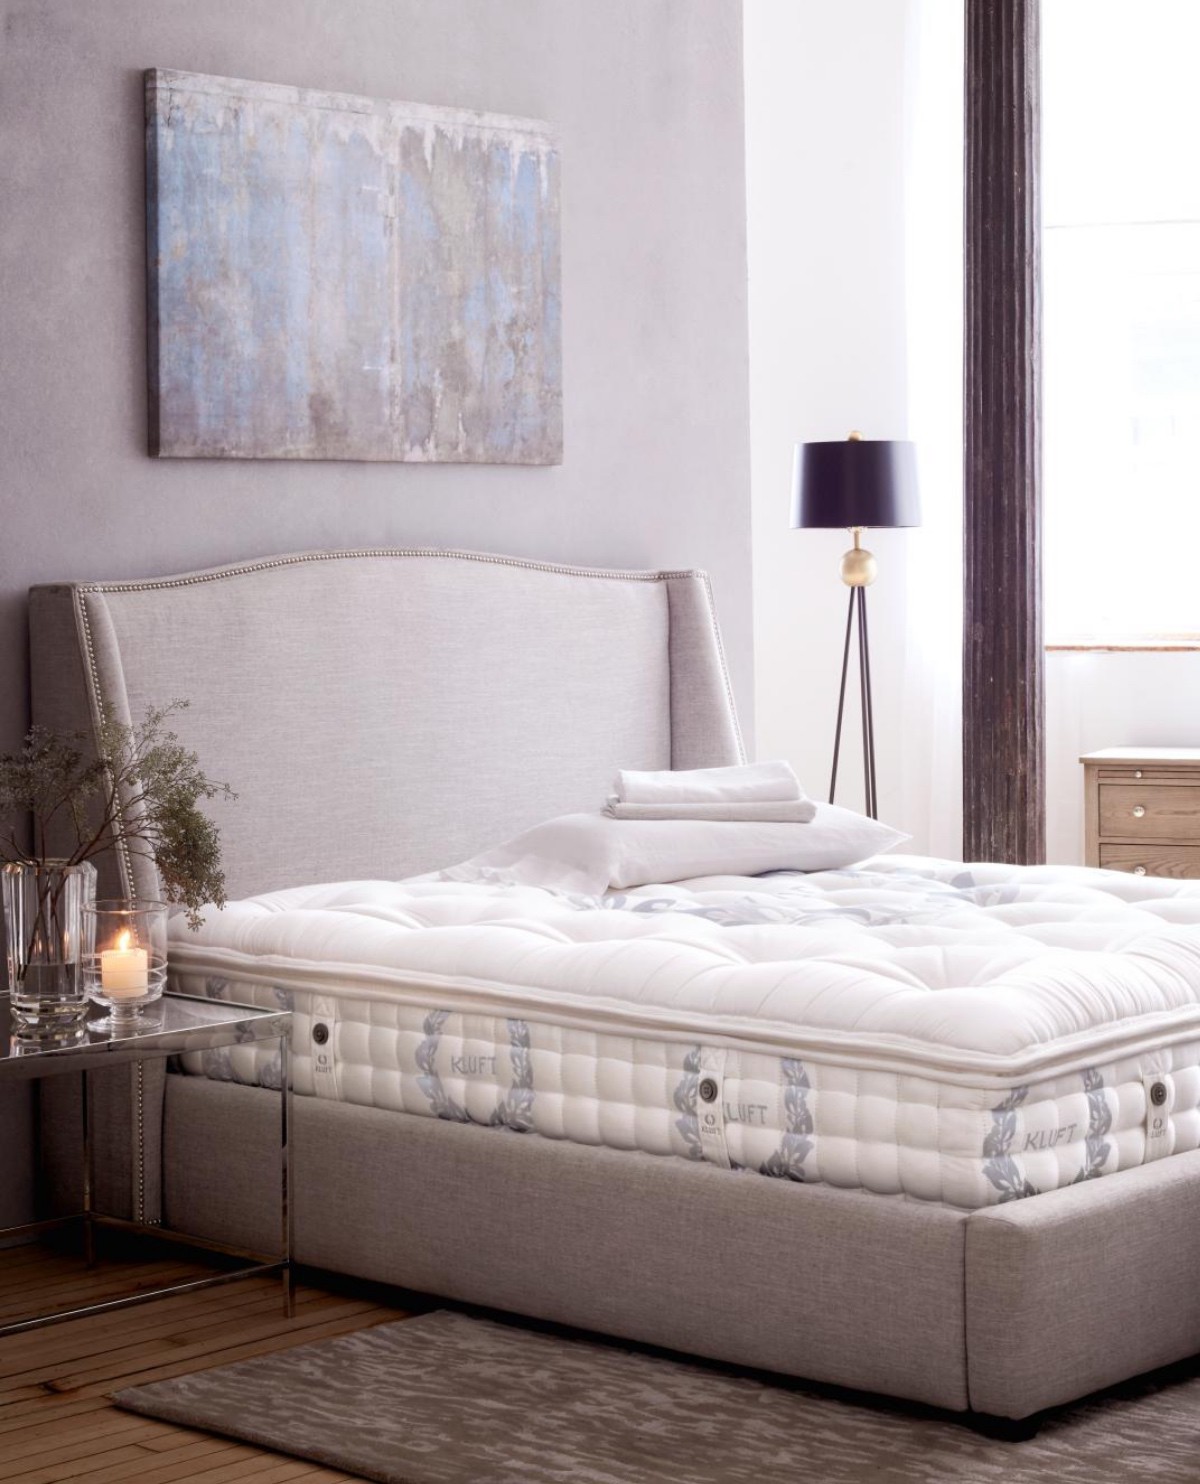 WHY BUY A MATTRESS WITH BLOOMINGDALE’S?